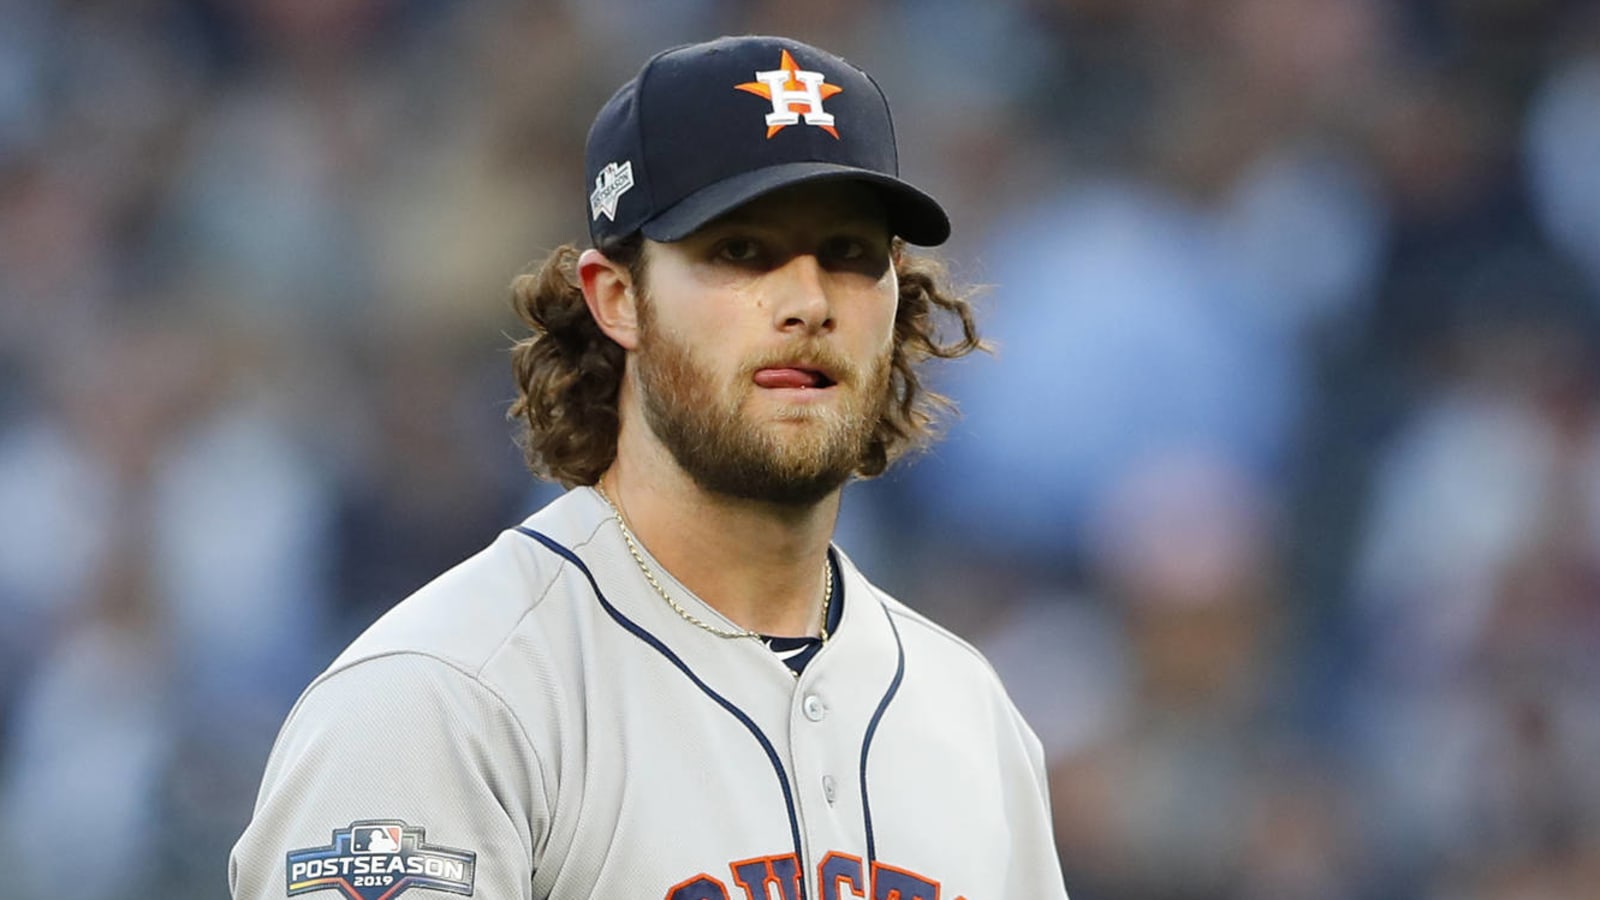 MLB world reacts to Yankees signing Gerrit Cole to record $324 million contract